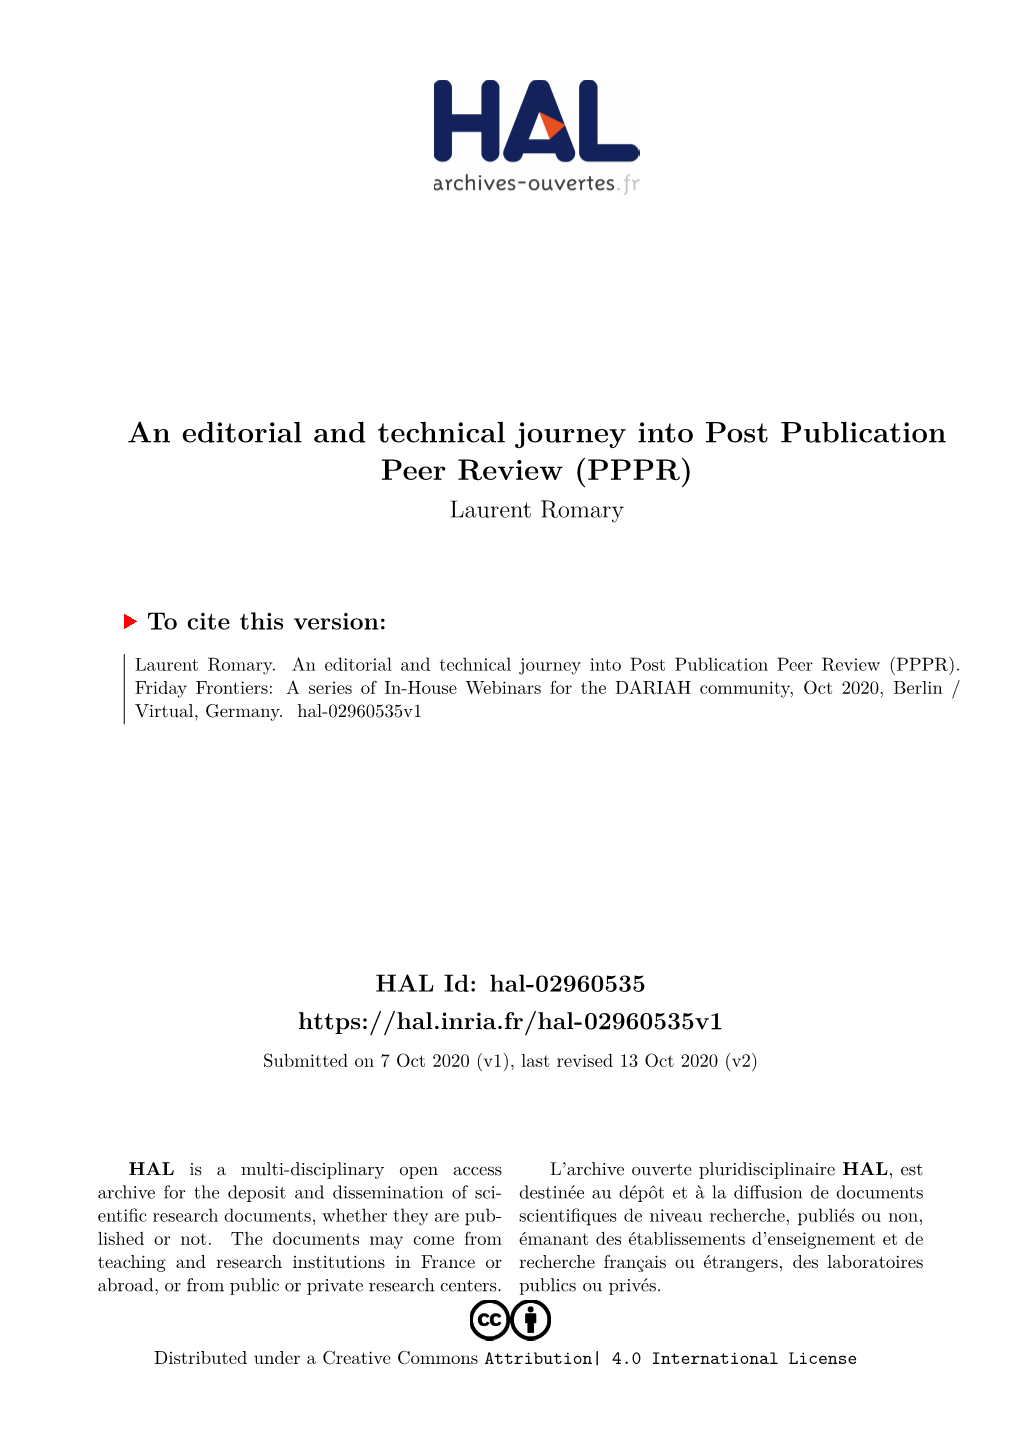 An Editorial and Technical Journey Into Post Publication Peer Review (PPPR) Laurent Romary